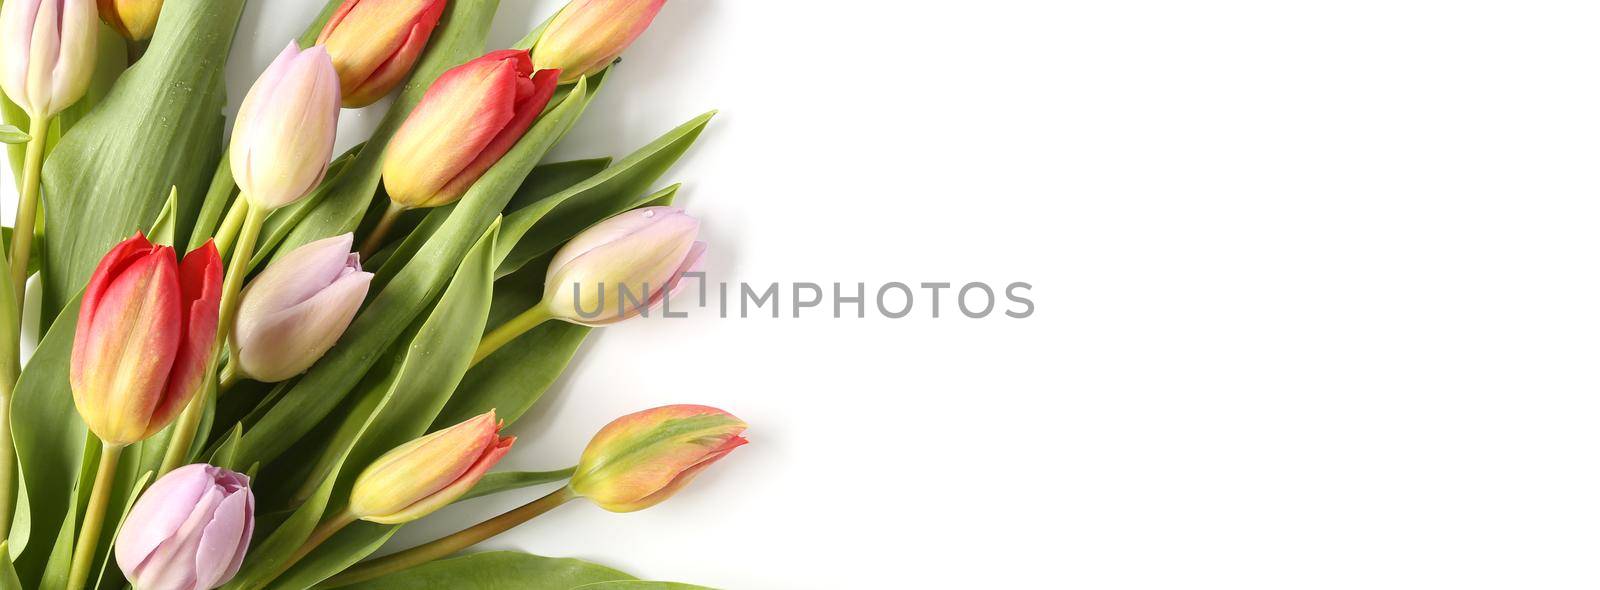 Elegant beautiful tulip flowers card on white background. Fresh bouquet of spring tulips over white. Spring, celebration, birthday, Mothers day, Women's Day, Easter, Valentines day, Horizontal